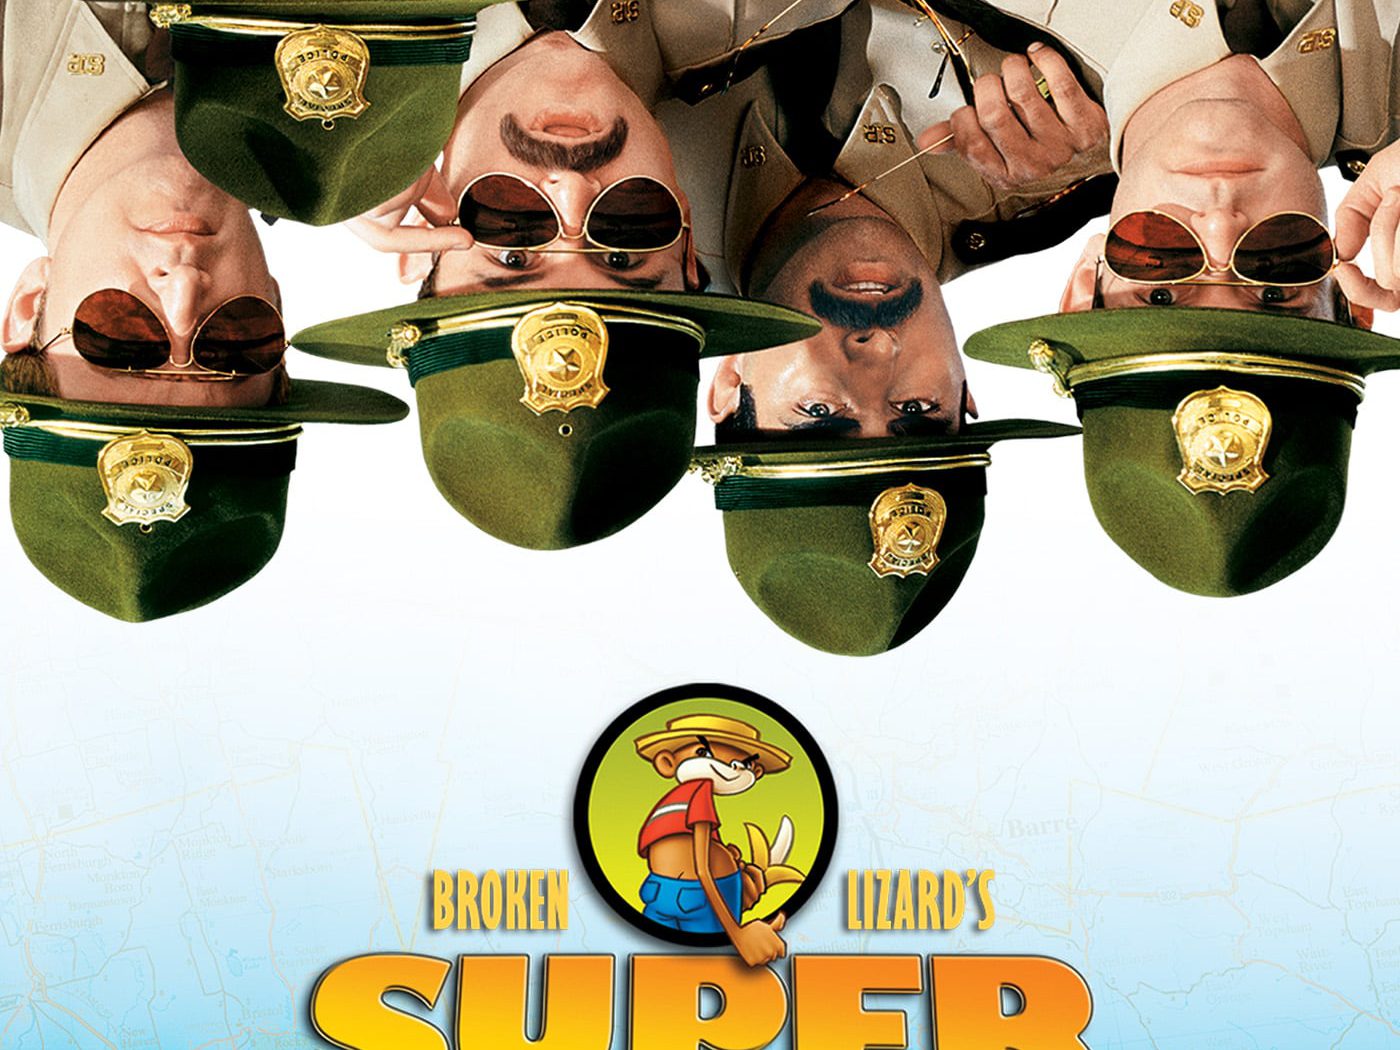 Poster for the movie "Super Troopers"